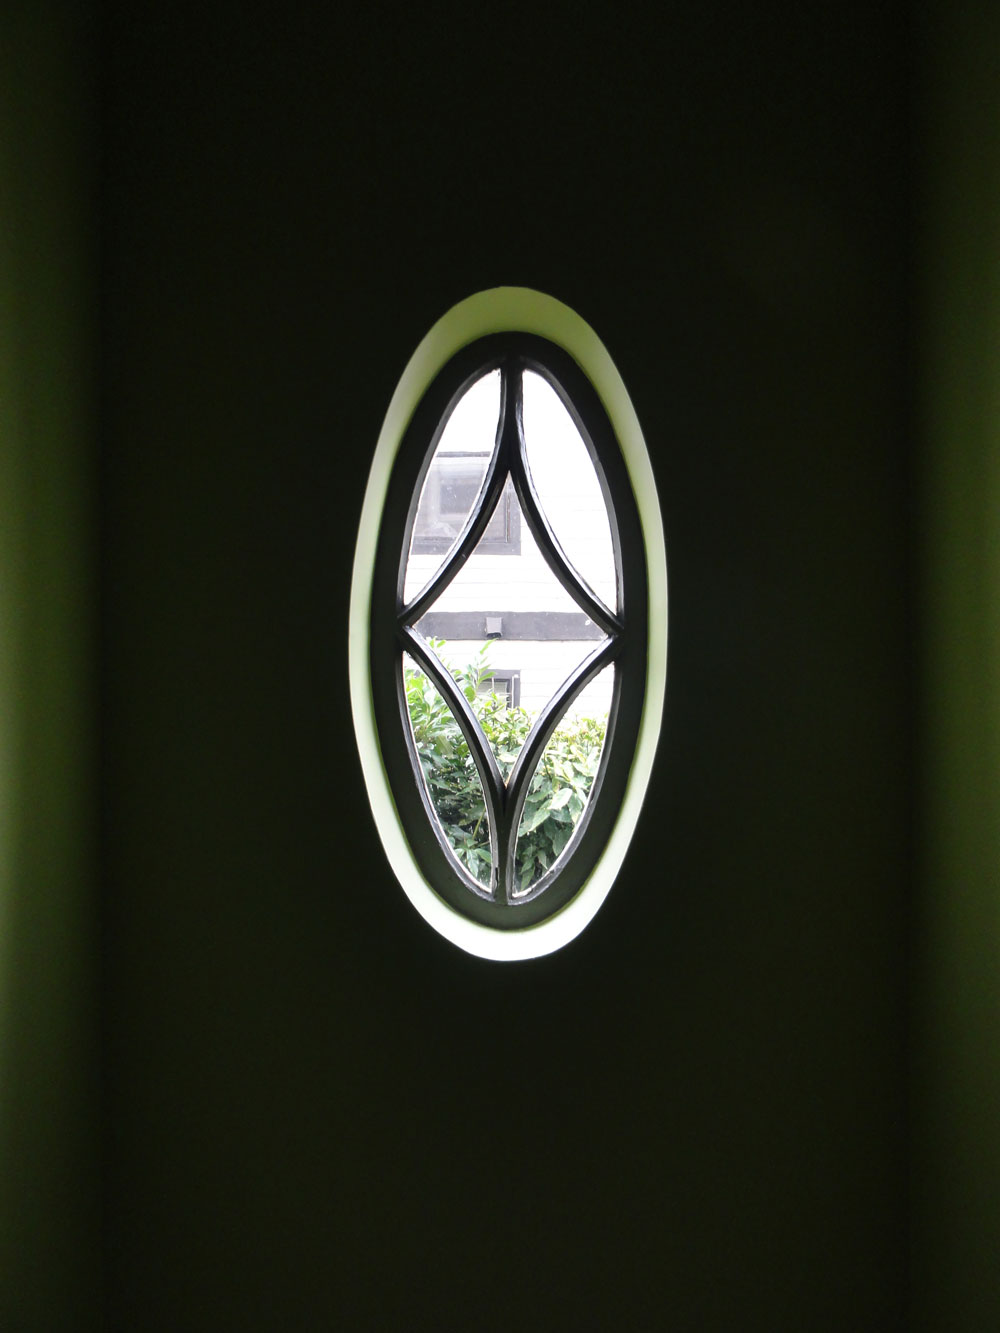 Remodeling serenity: oval window